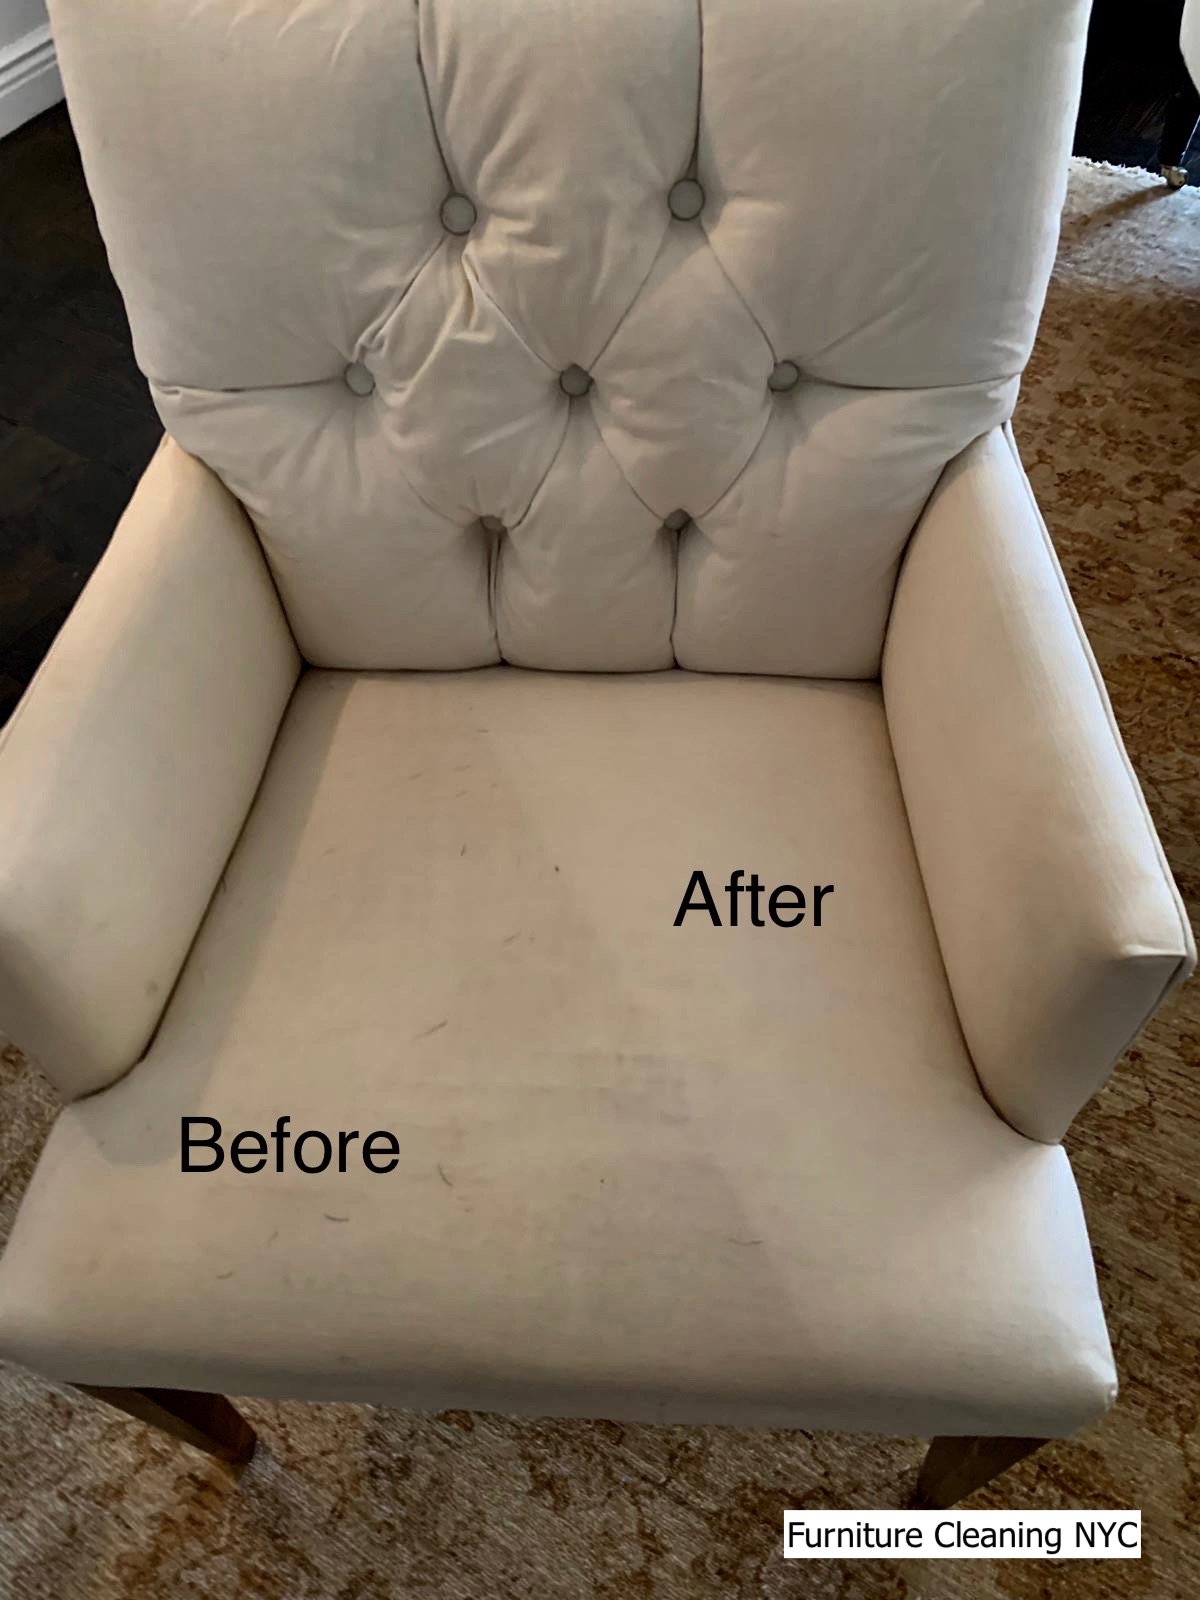 Chairs cleaning service nyc